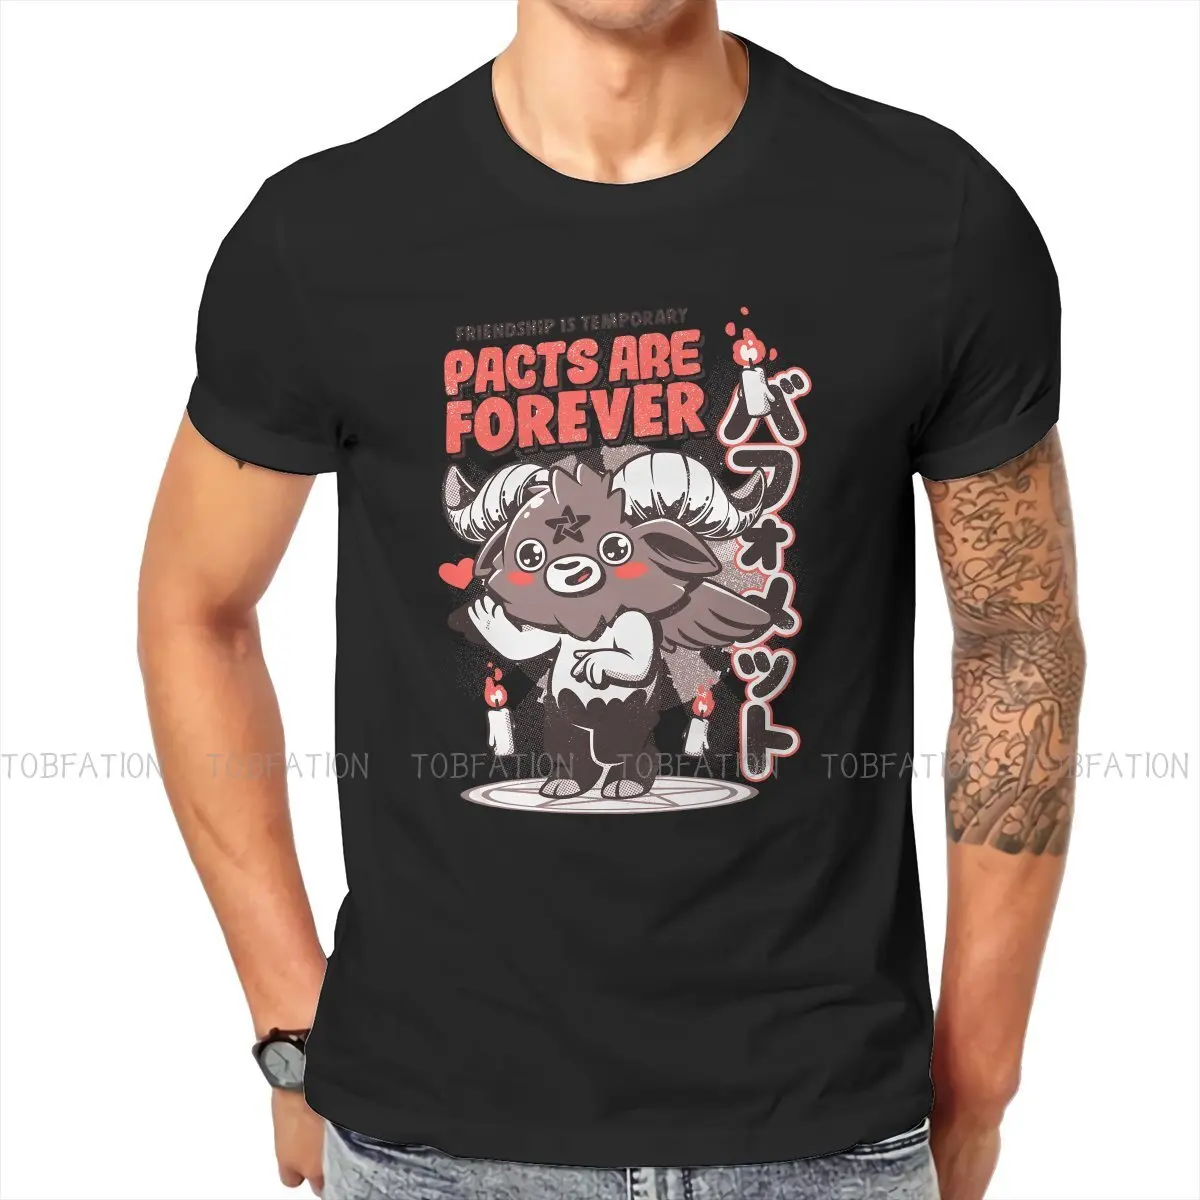 

Pacts Are Forever Man's TShirt Baphomet Satan Lucifer Crewneck Short Sleeve Fabric T Shirt Humor Top Quality Gift Idea